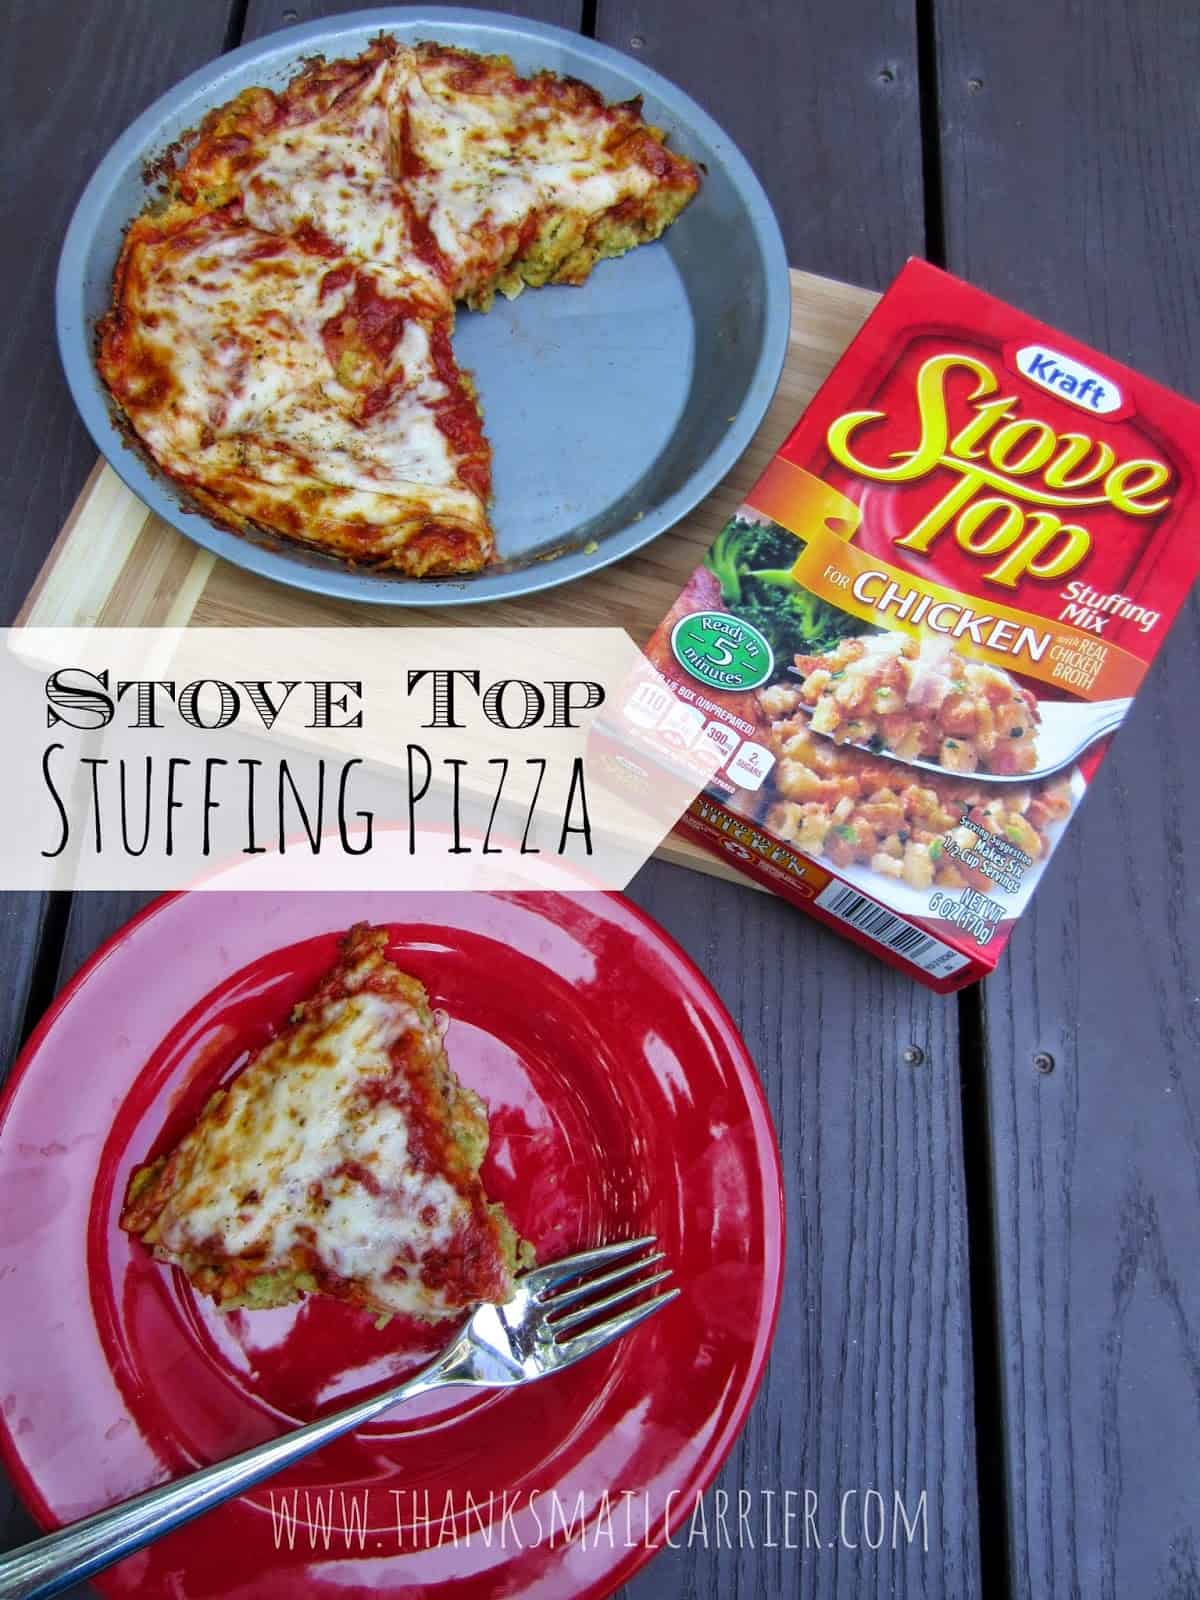 Stove top stuffing pizza